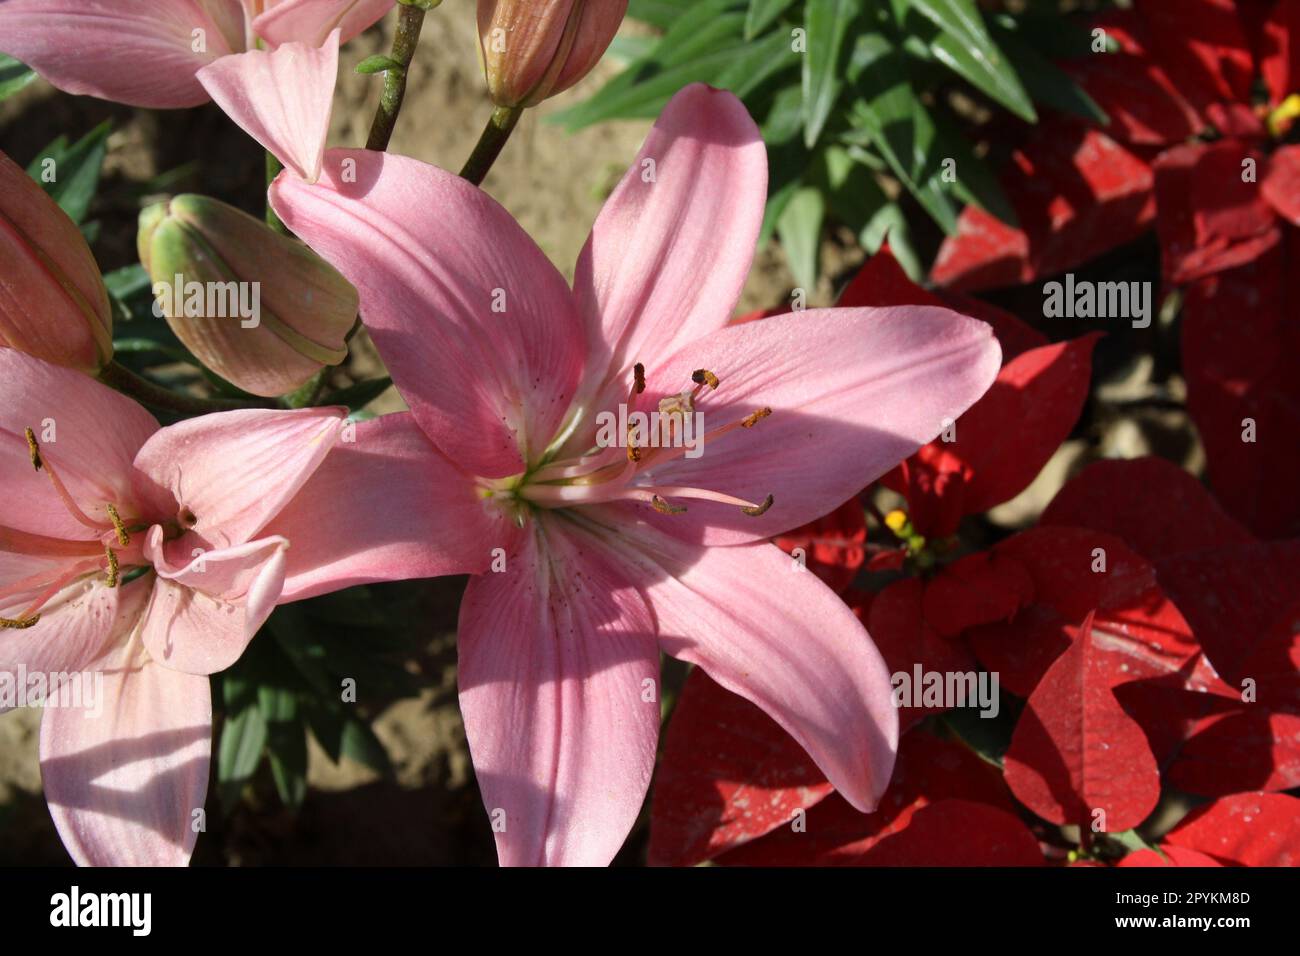 Lilium 'Cherry Pink' Asiatic Lily (Lilium auratum) with brown central spots and brown anthers : (pix Sanjiv Shukla) Stock Photo